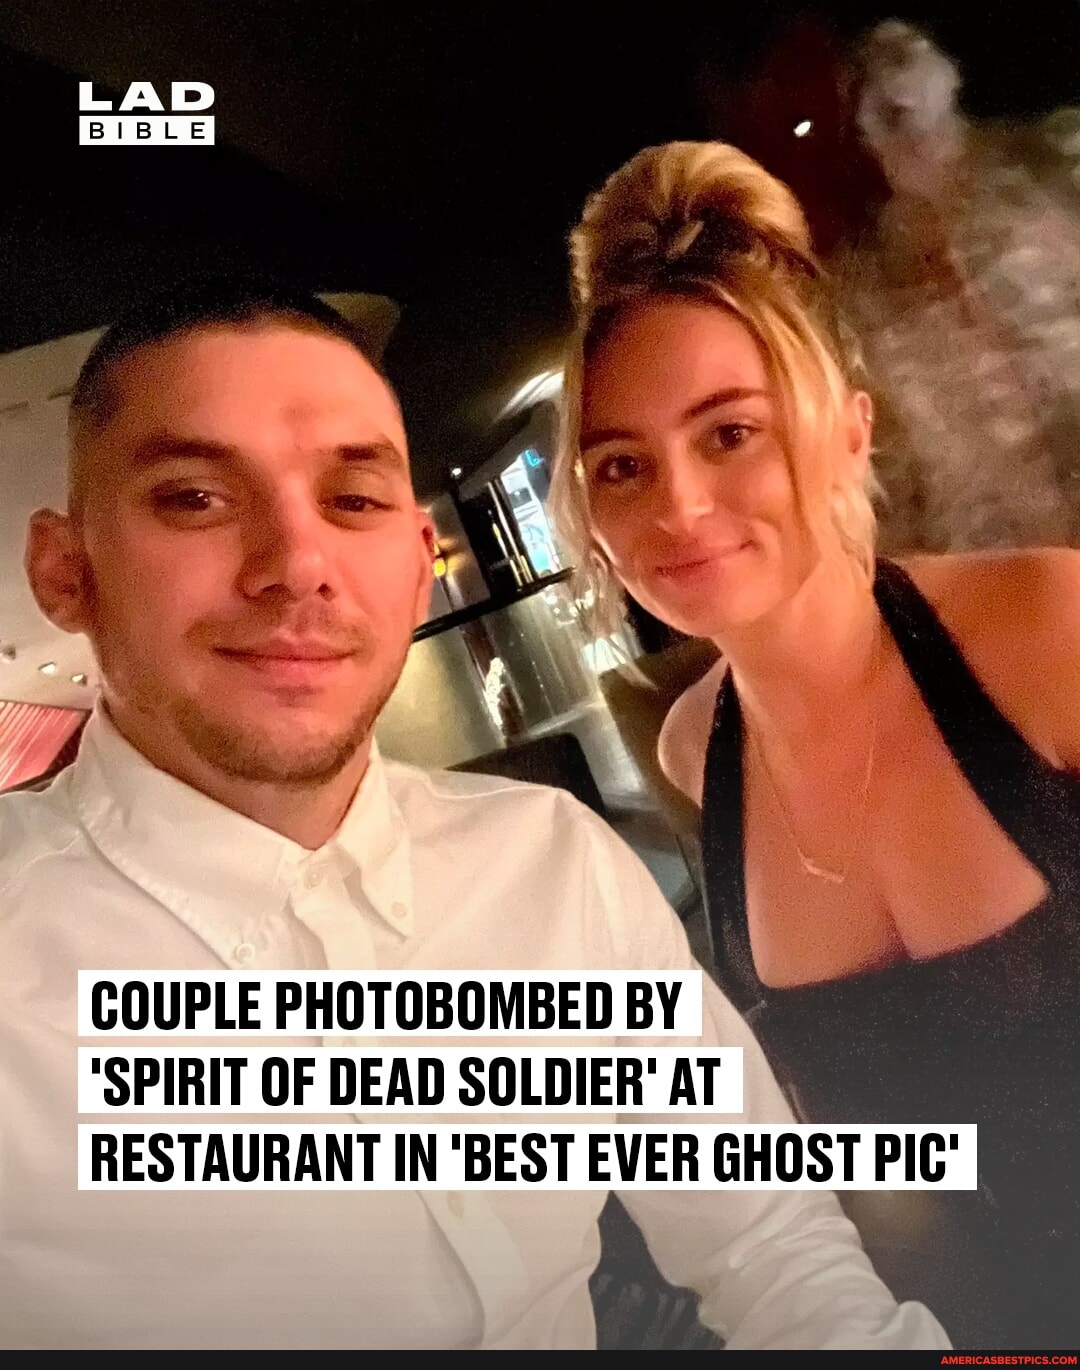 A Couple Were Left Stunned After Their Date Night Pictures Were Allegedly Photobombed By A Ghost